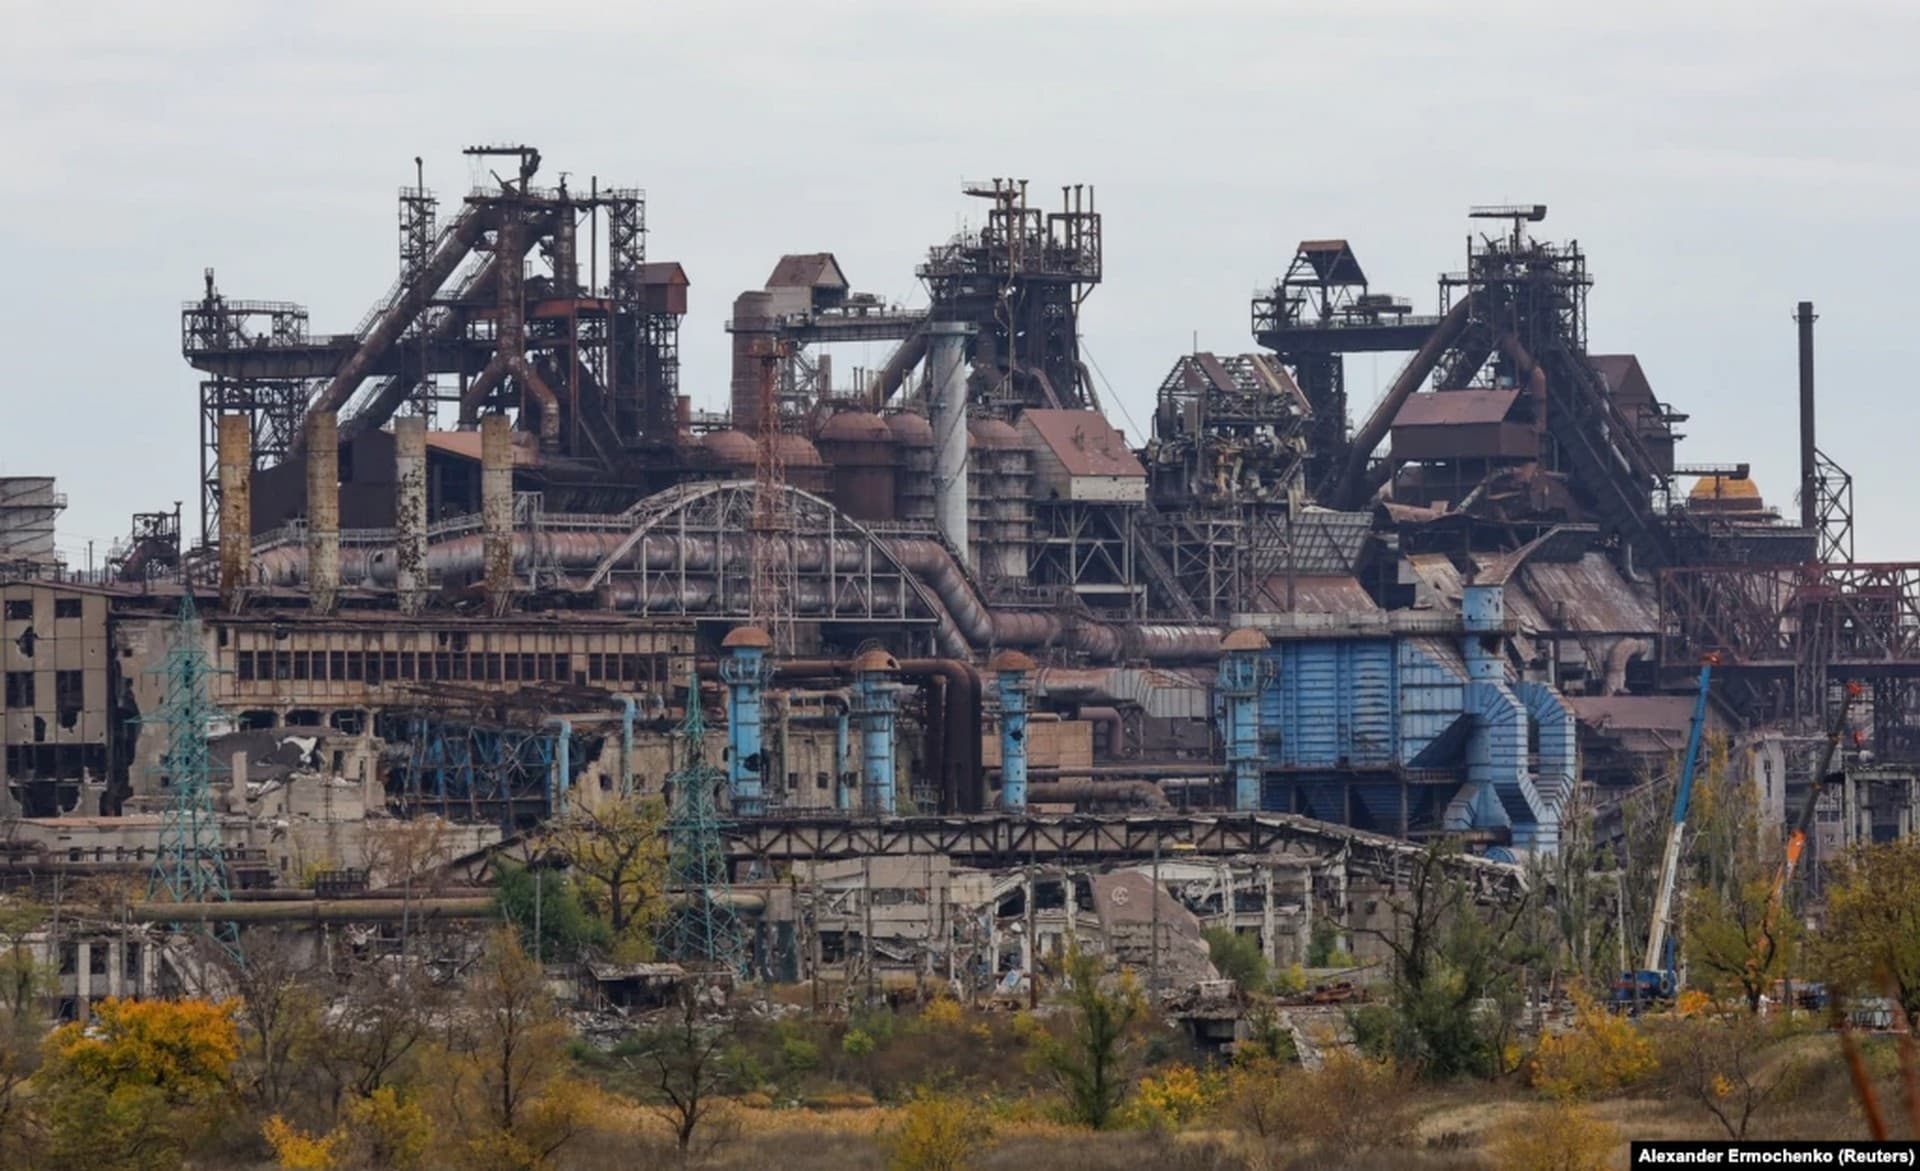 The heavily damaged Azovstal steel mill photographed on October 29